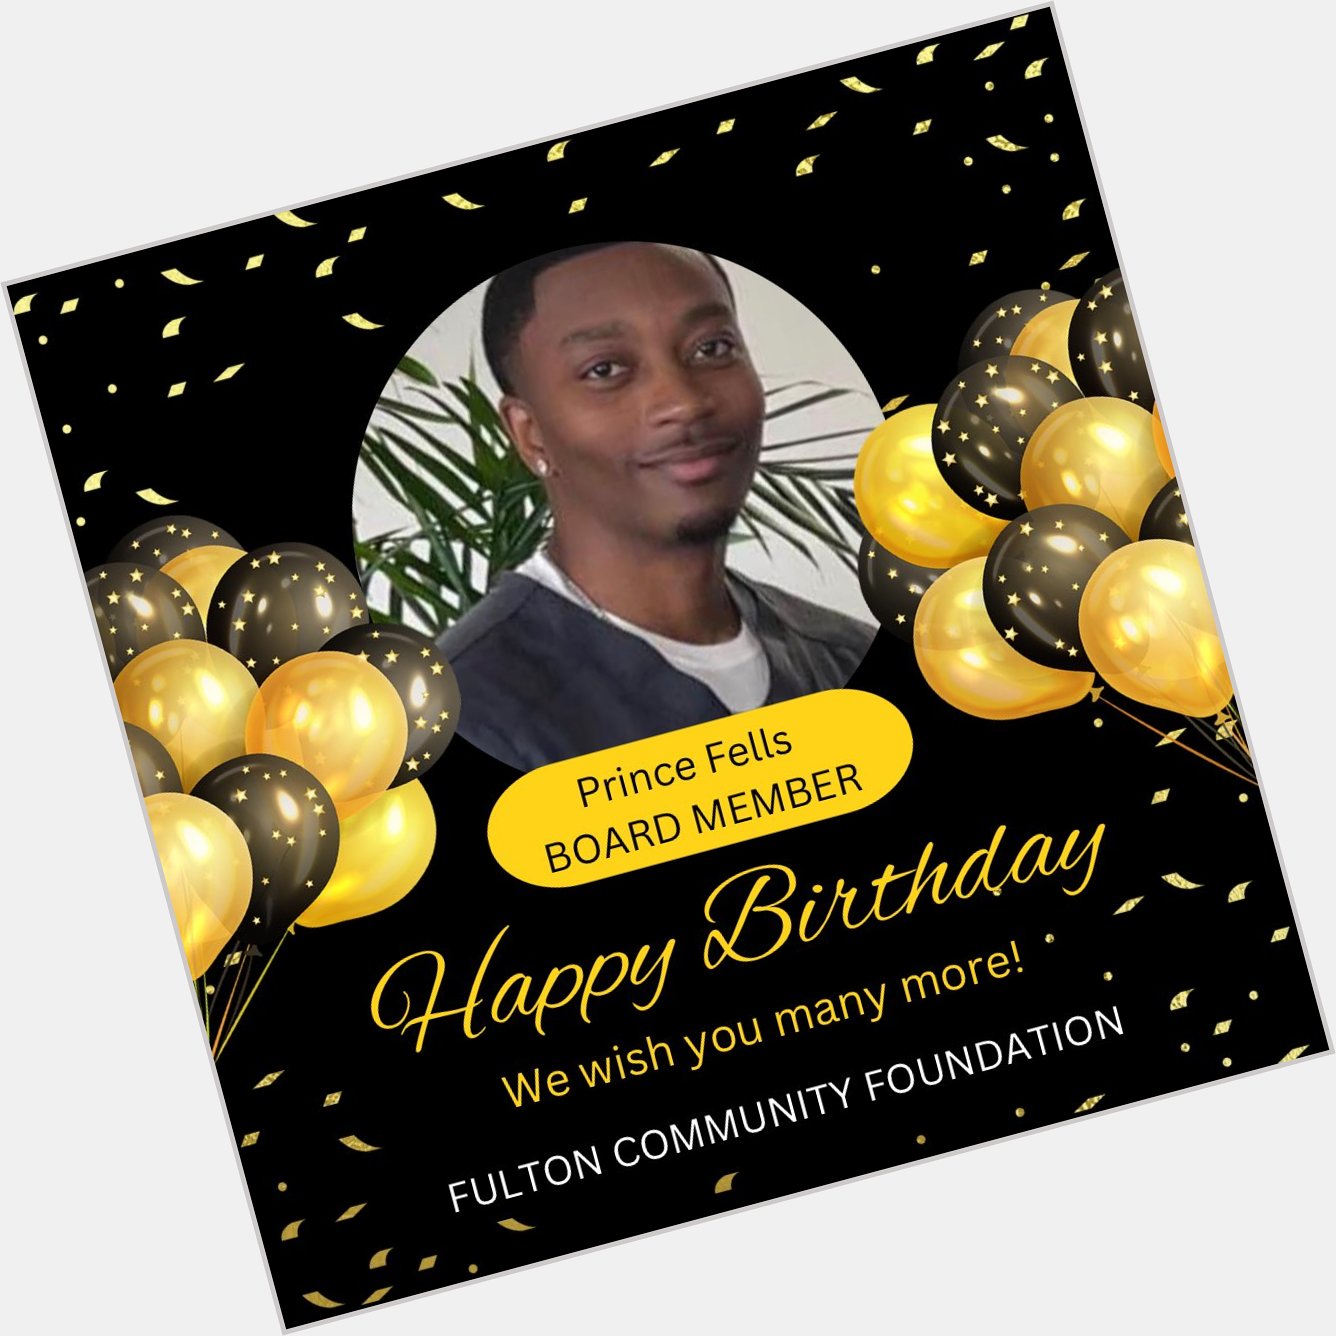 Happy Birthday to our Board Member Prince Fells   We hope you enjoy your day  